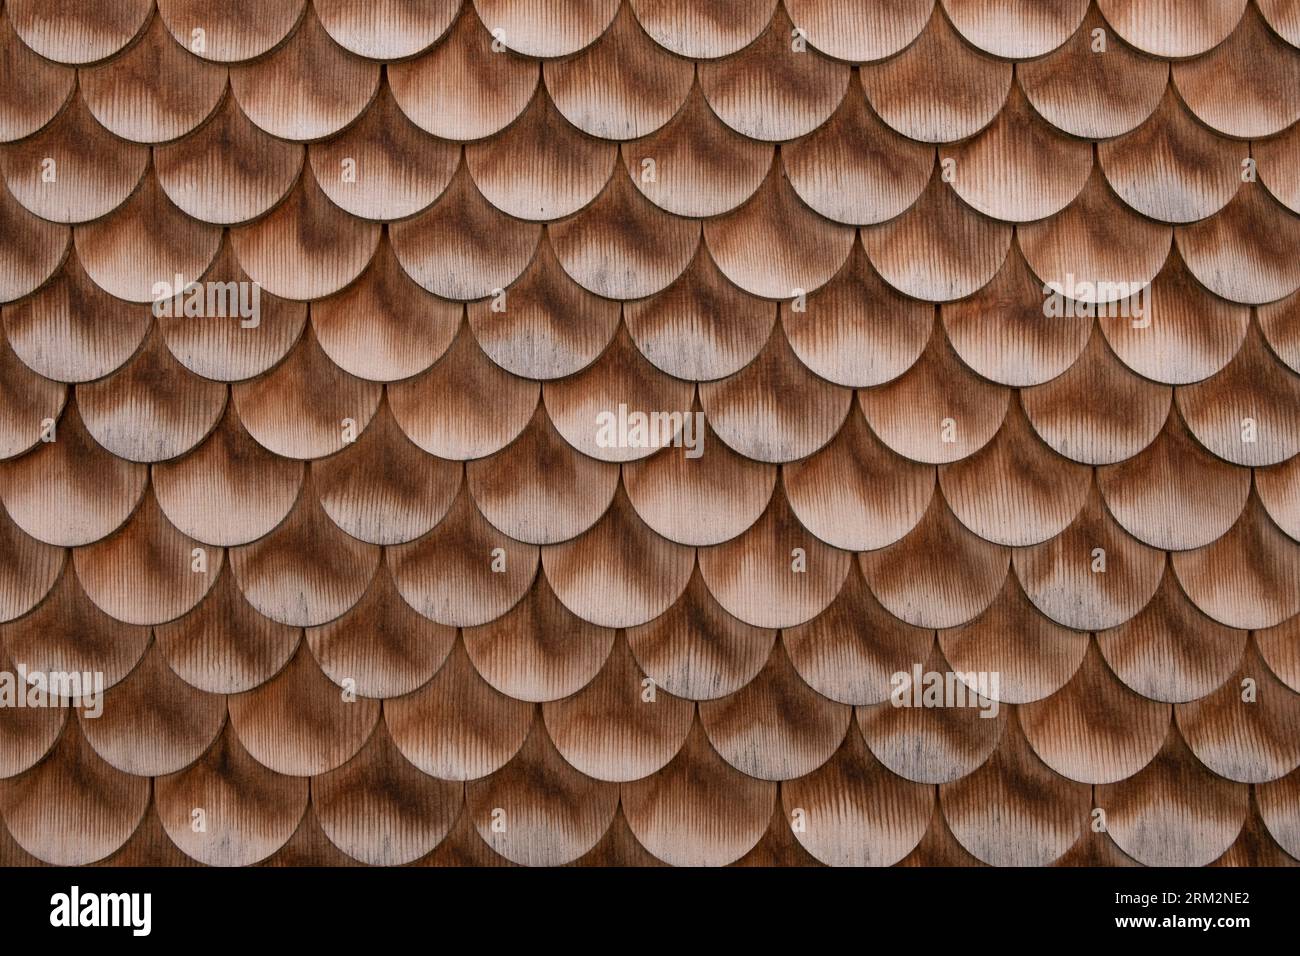 Wooden round bottom shingles of wall siding of historic farmhouse. Wood shingle pattern, roof or facade. Traditional wooden architecture texture. Stock Photo